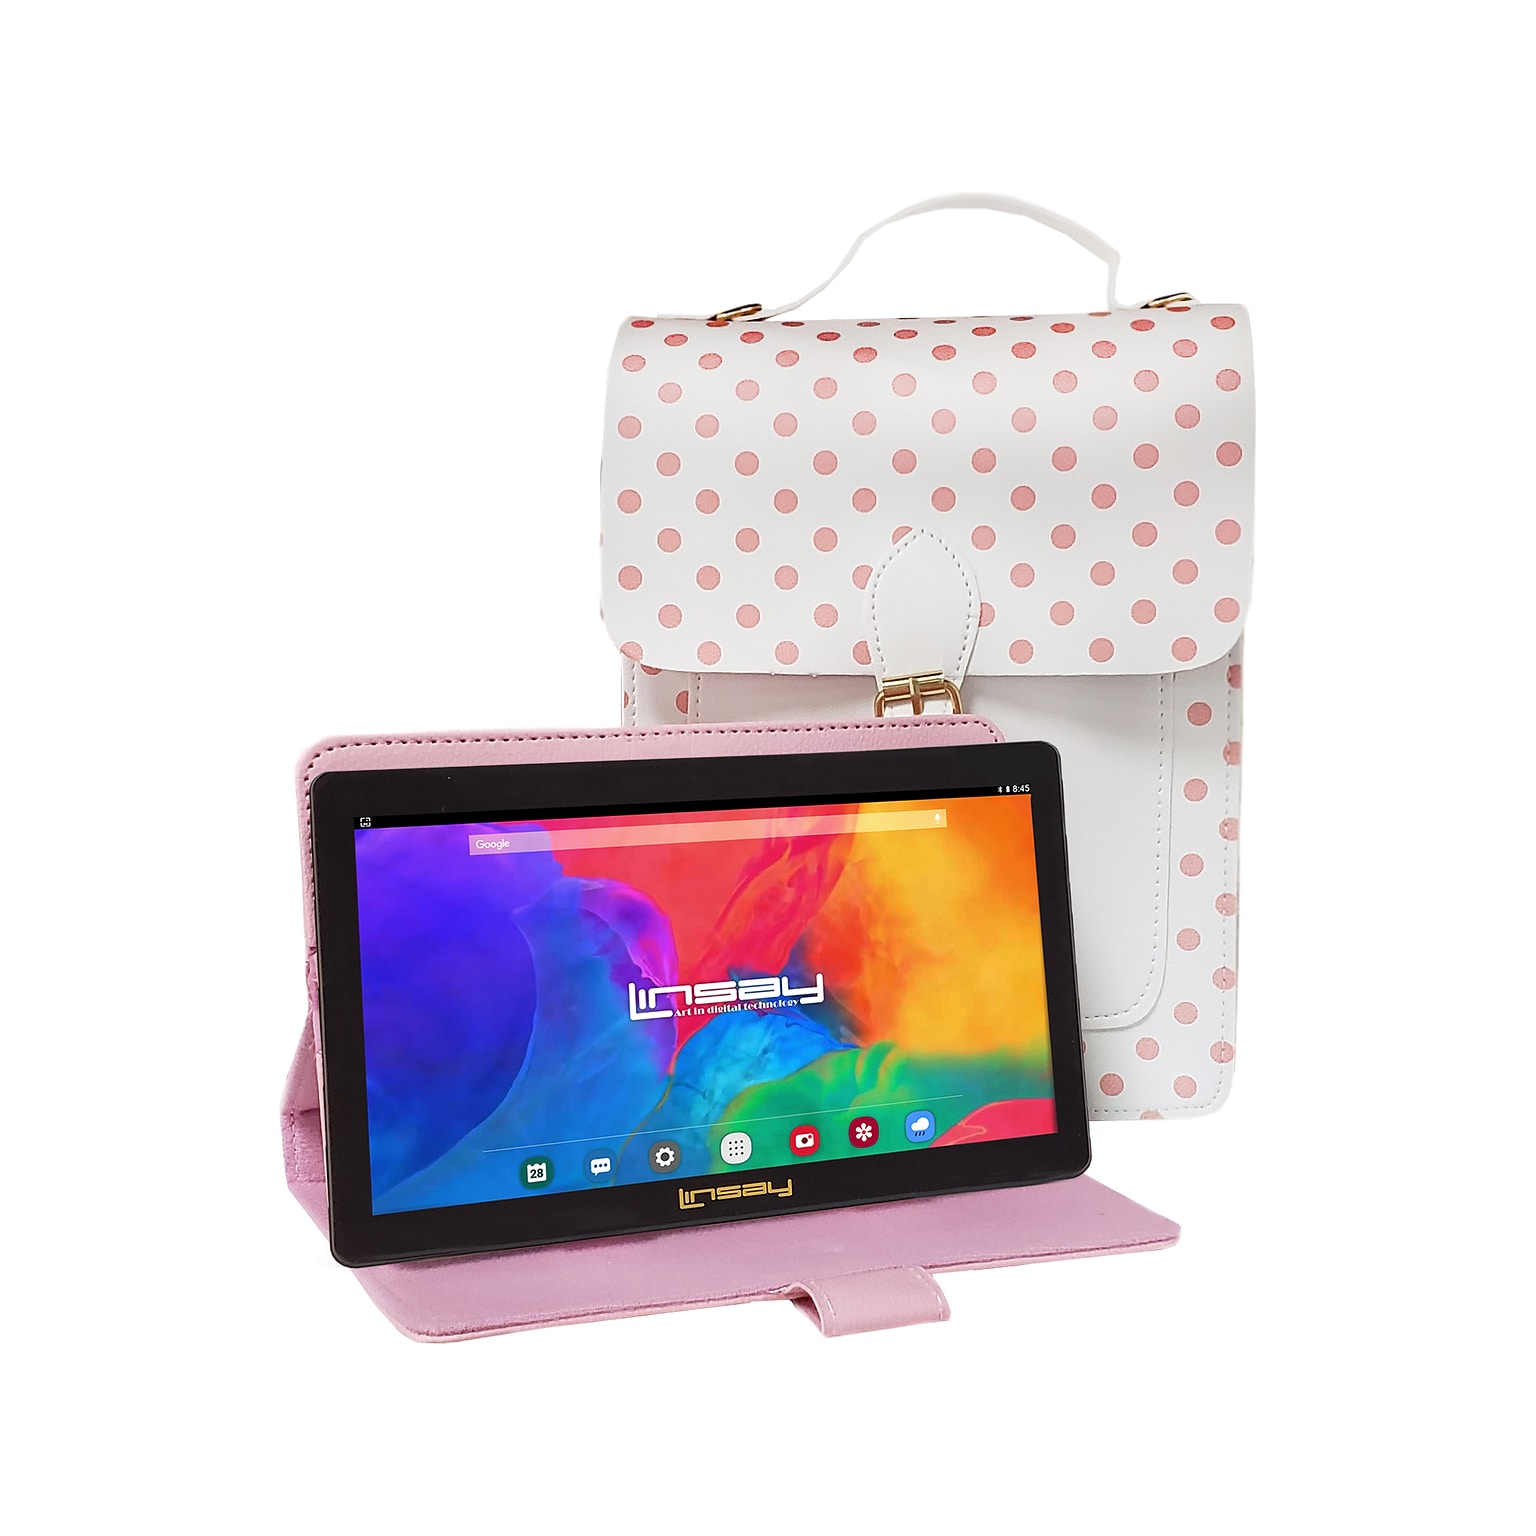 Linsay 7 Tablet with Stylus, Case, and Handbag, 2GB RAM, 64GB Storage, Android 13, Sweet Pink (F7UHDSWEETPINK)